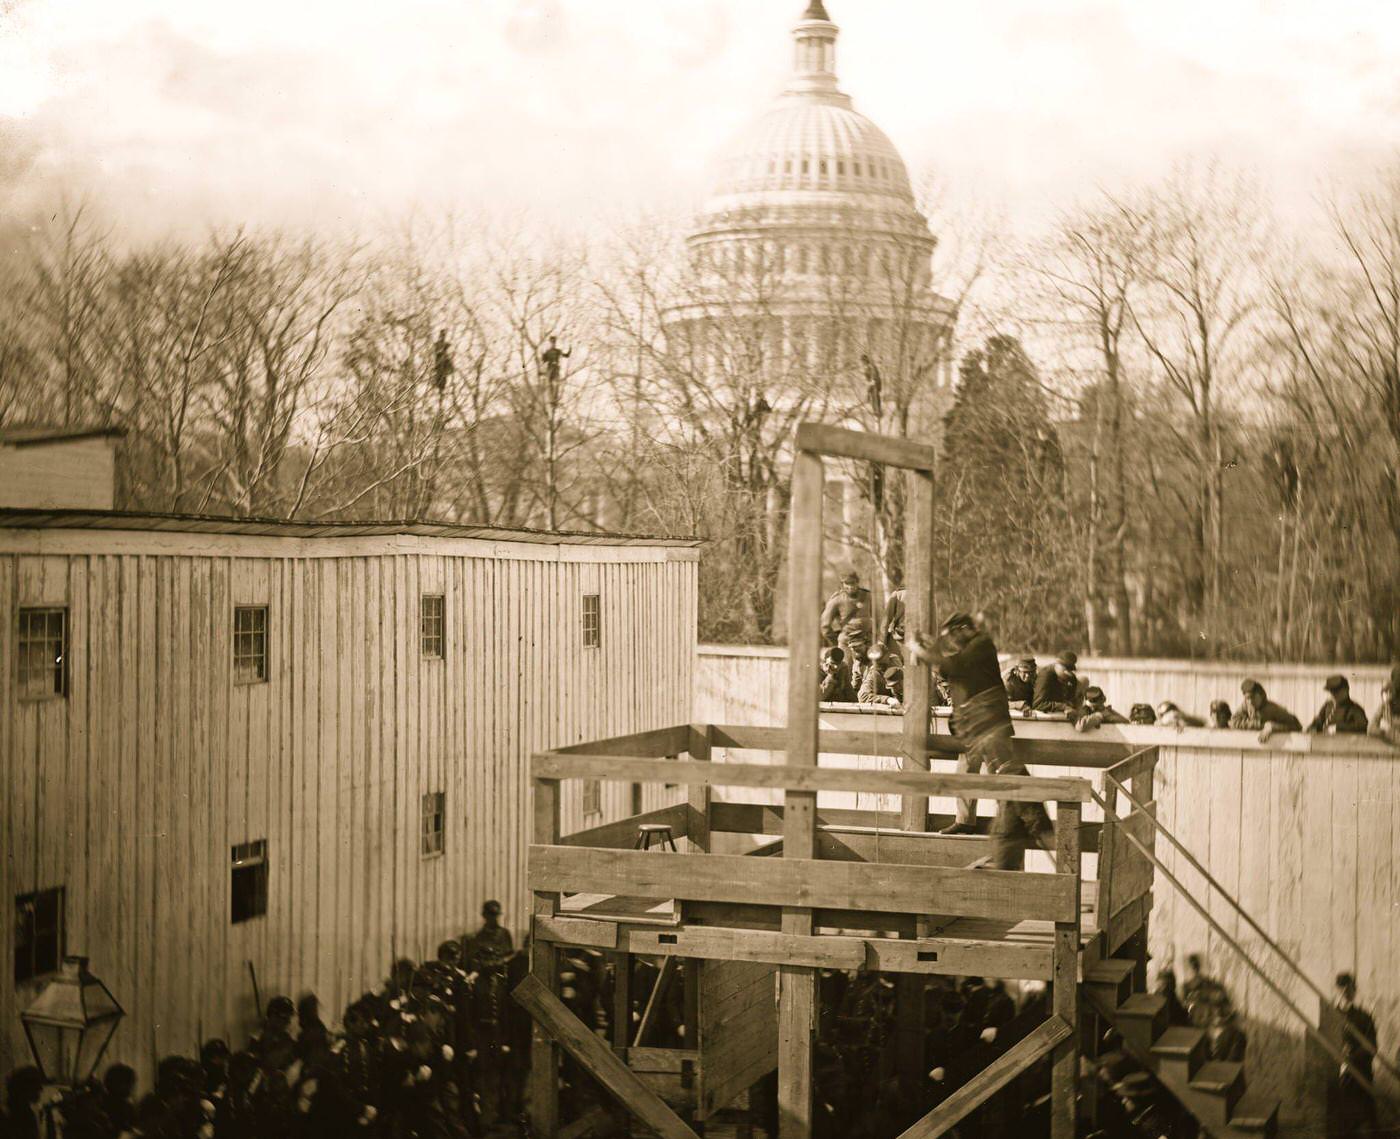 Washington, D.C. Soldier springing the trap; men in trees and Capitol dome beyond, 1865